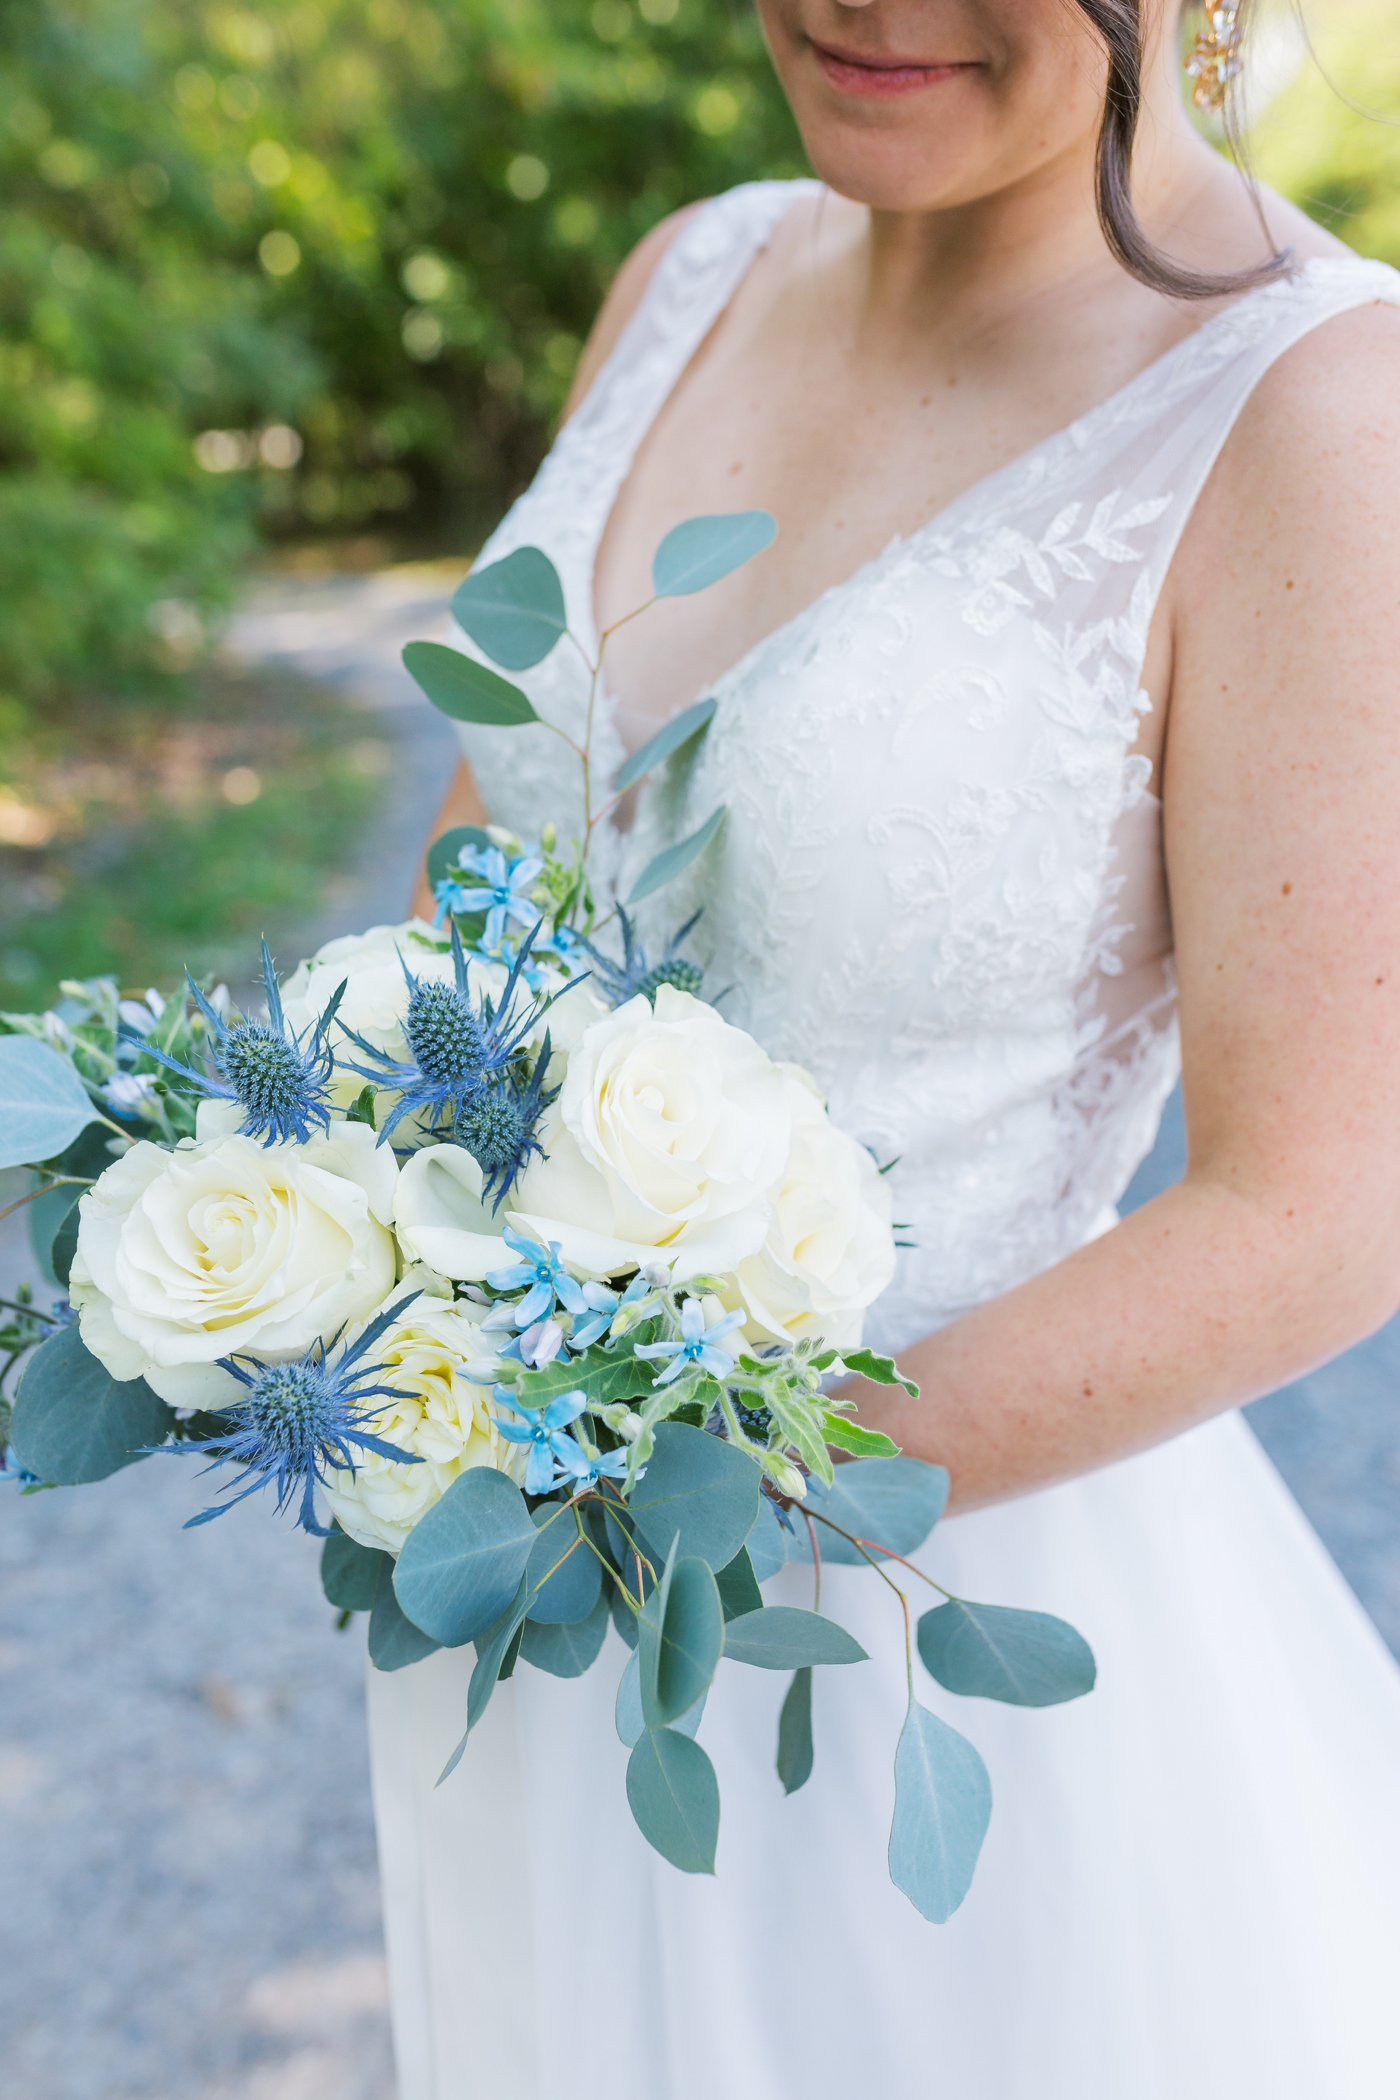 Bridal bouquet with eucalyptus, blue thistle and white roses